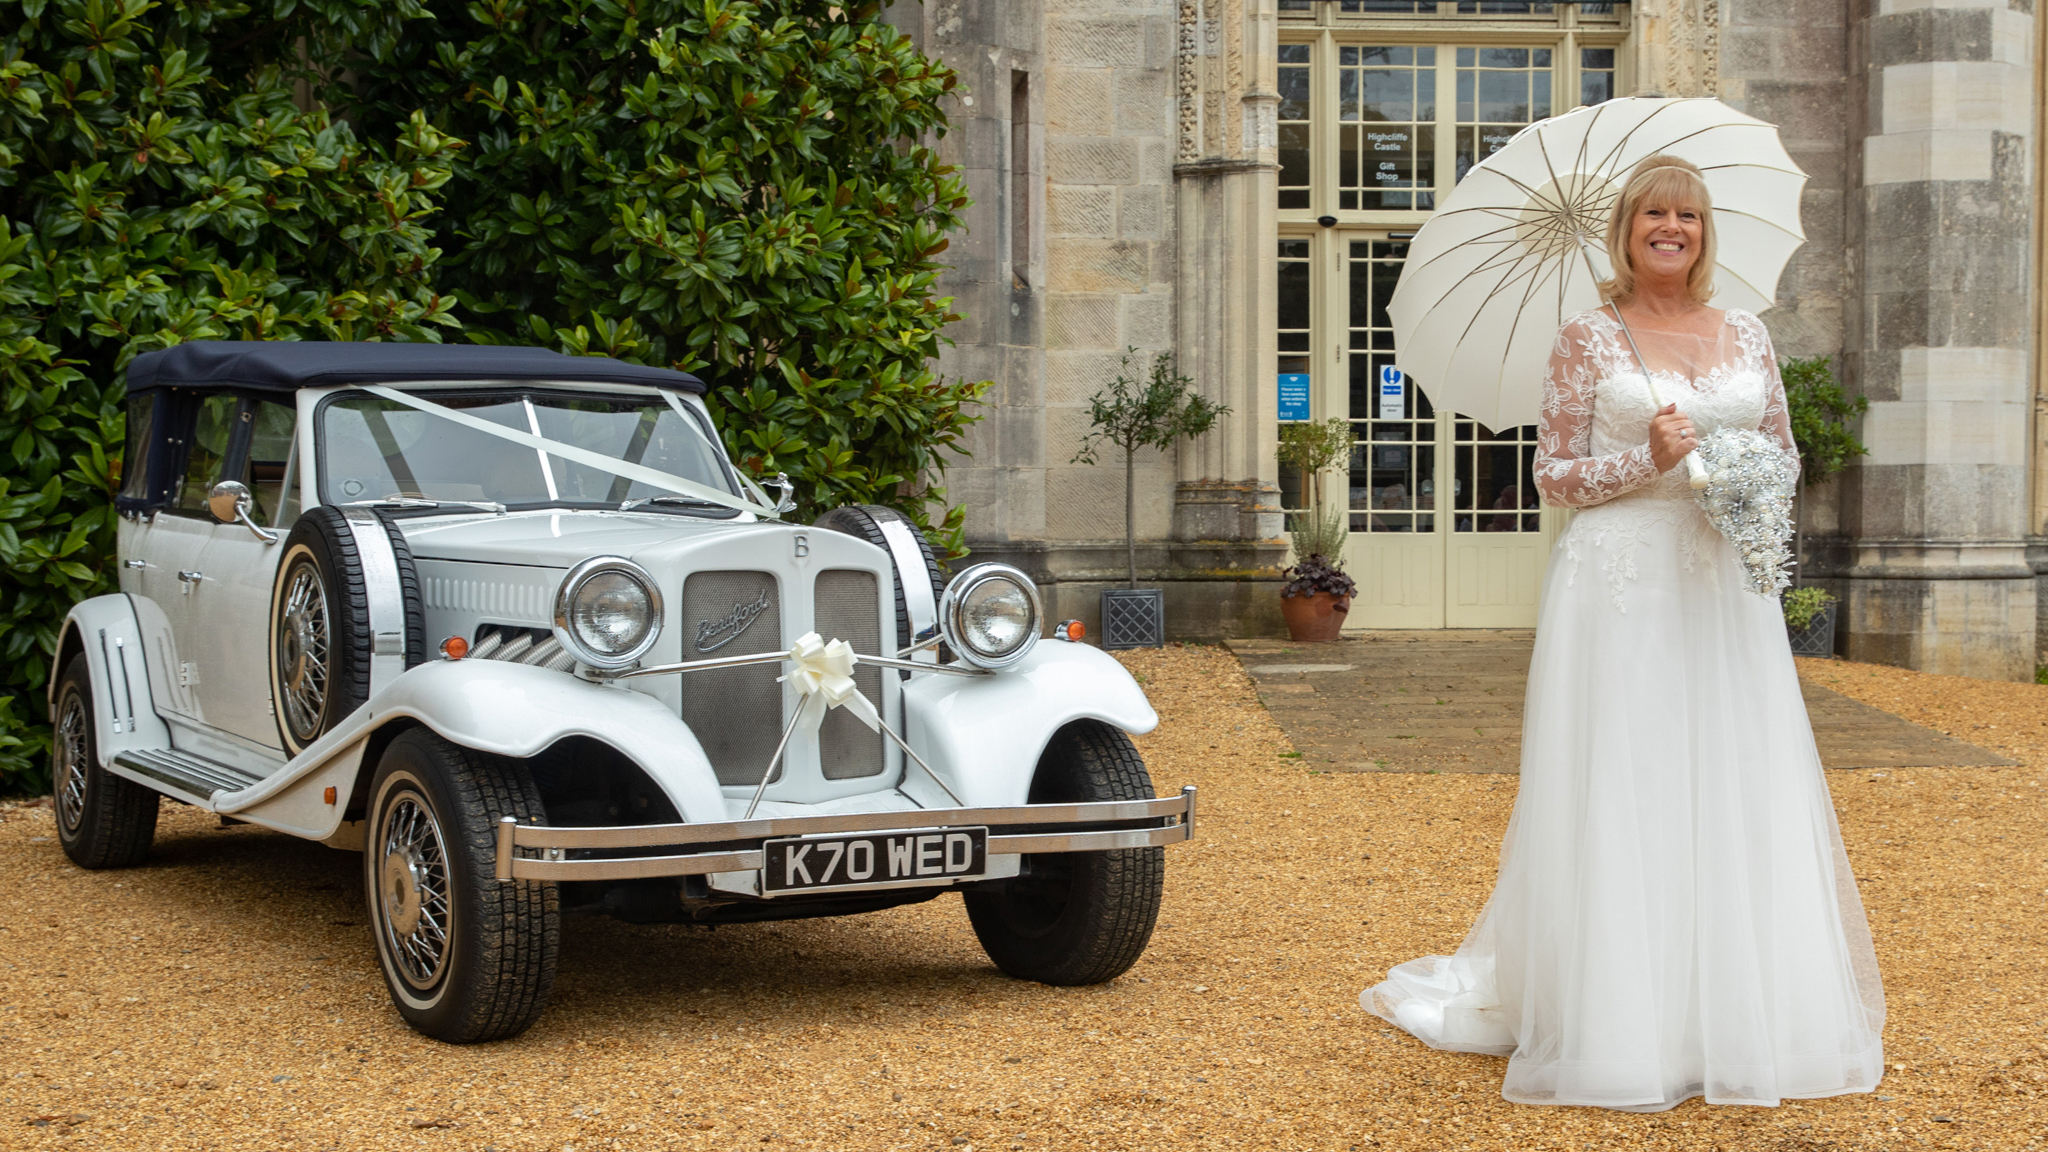 White vintage Beauford convertible with roof up decorated with white ribbon and bow at a local Rochester wedding. Smiling bride standing next to the vehicle with a white umbrella h